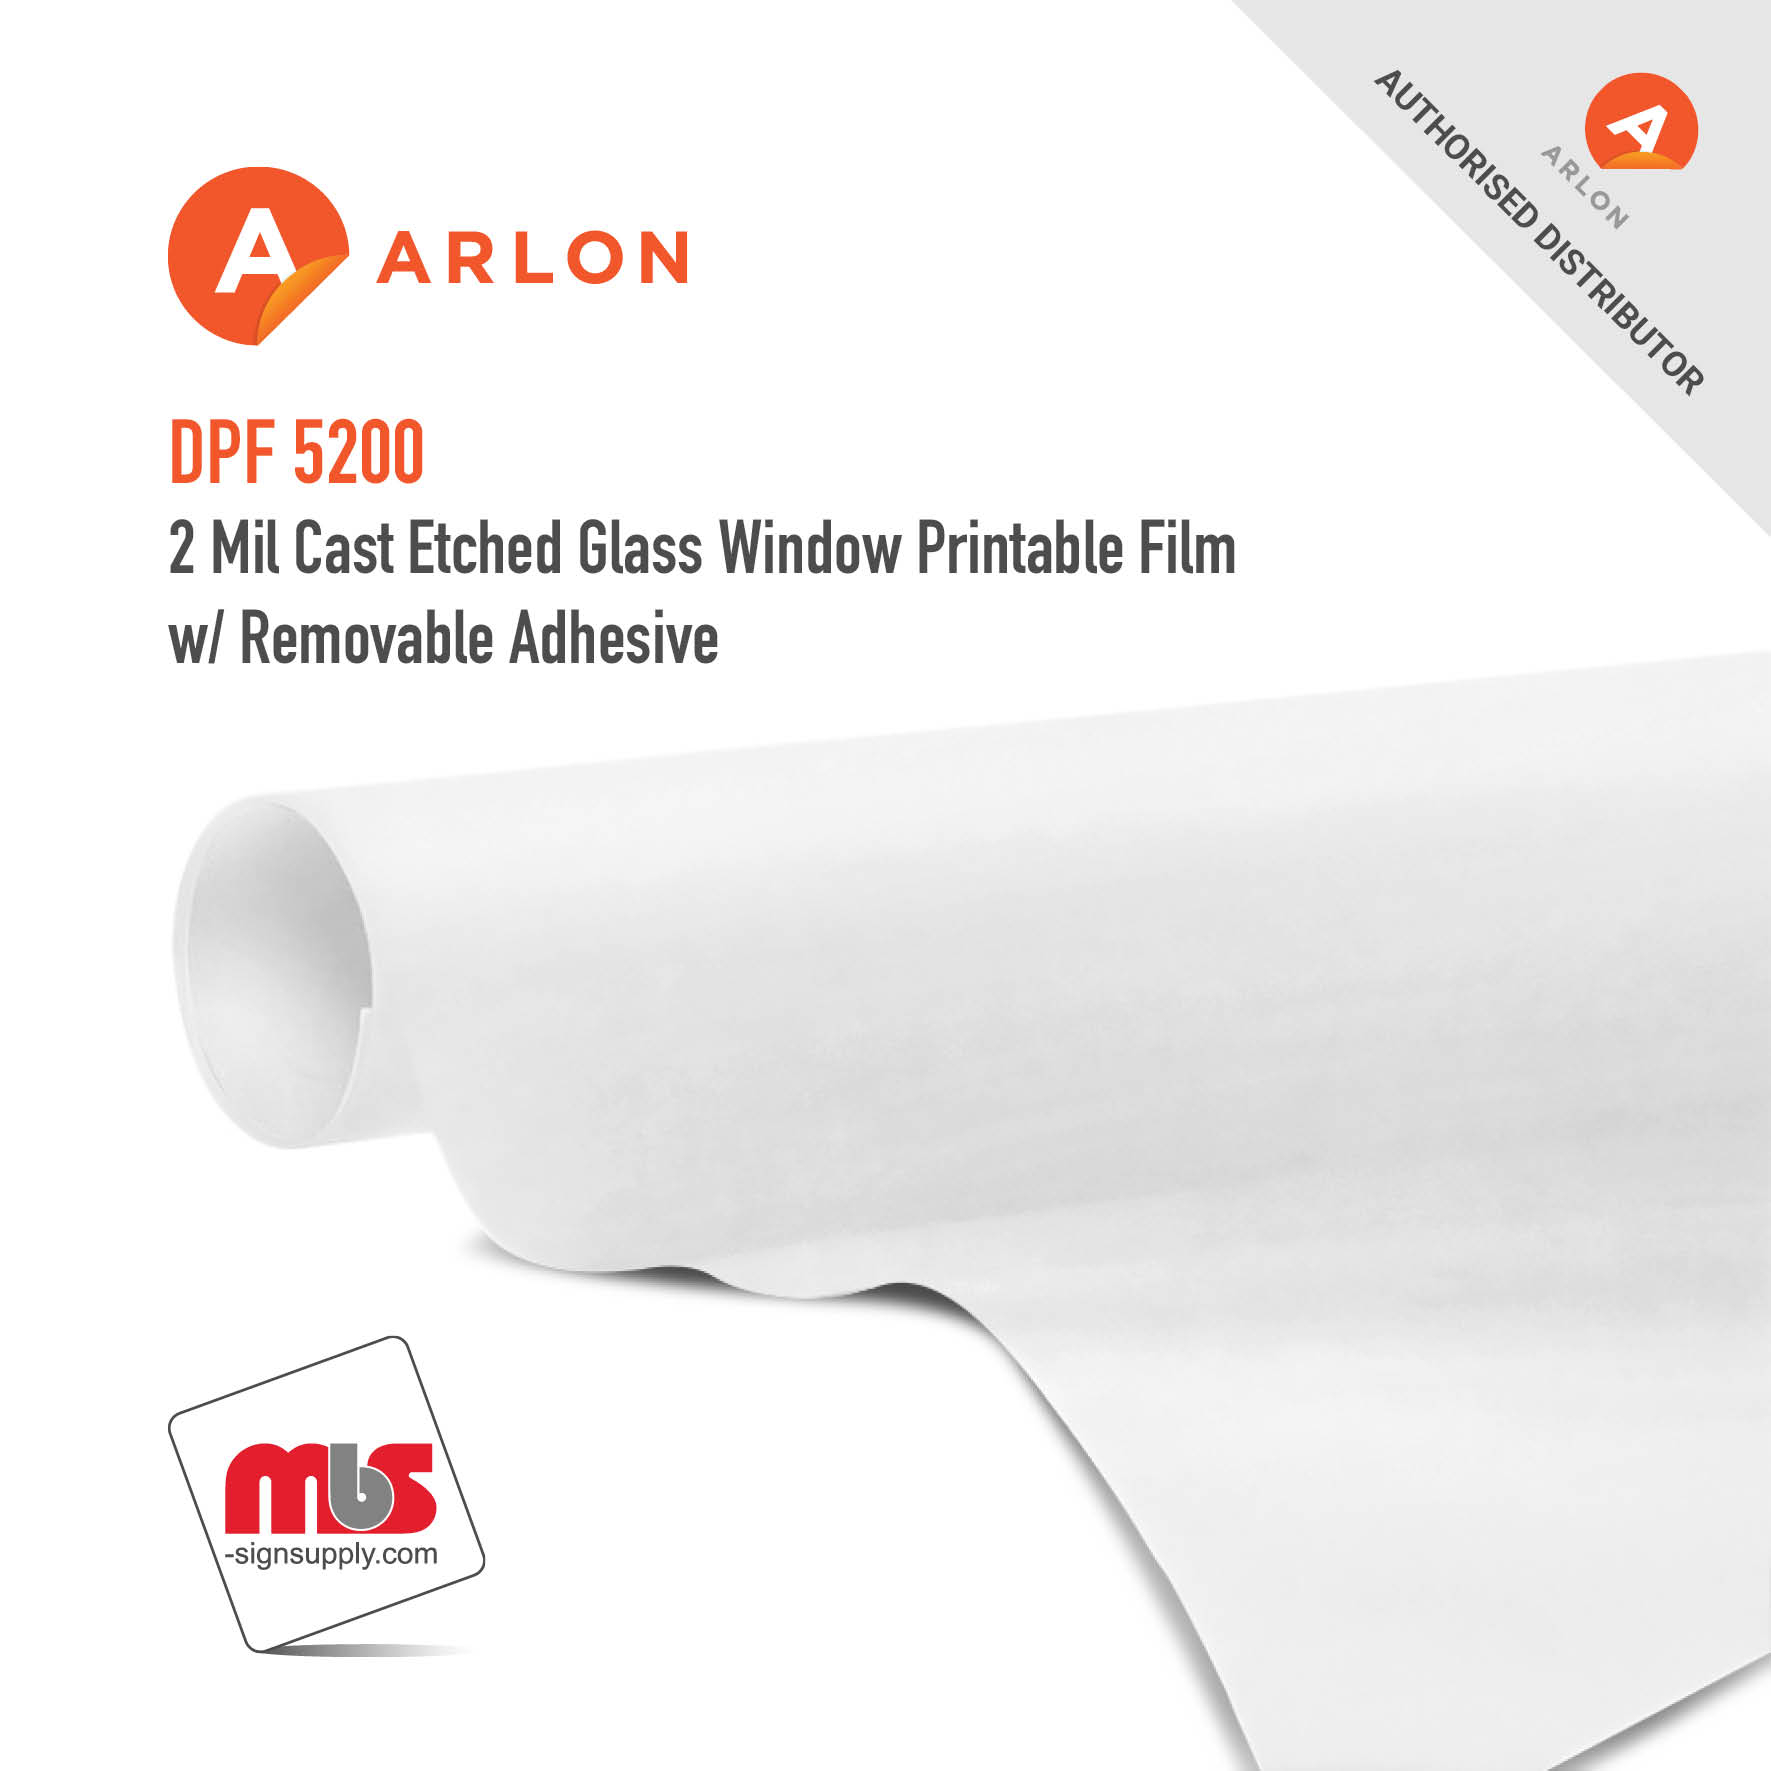 24'' x 50 Yard Roll - Arlon DPF 5200 2 Mil Cast Etched Glass Window Printable Film w/ Removable Adhesive